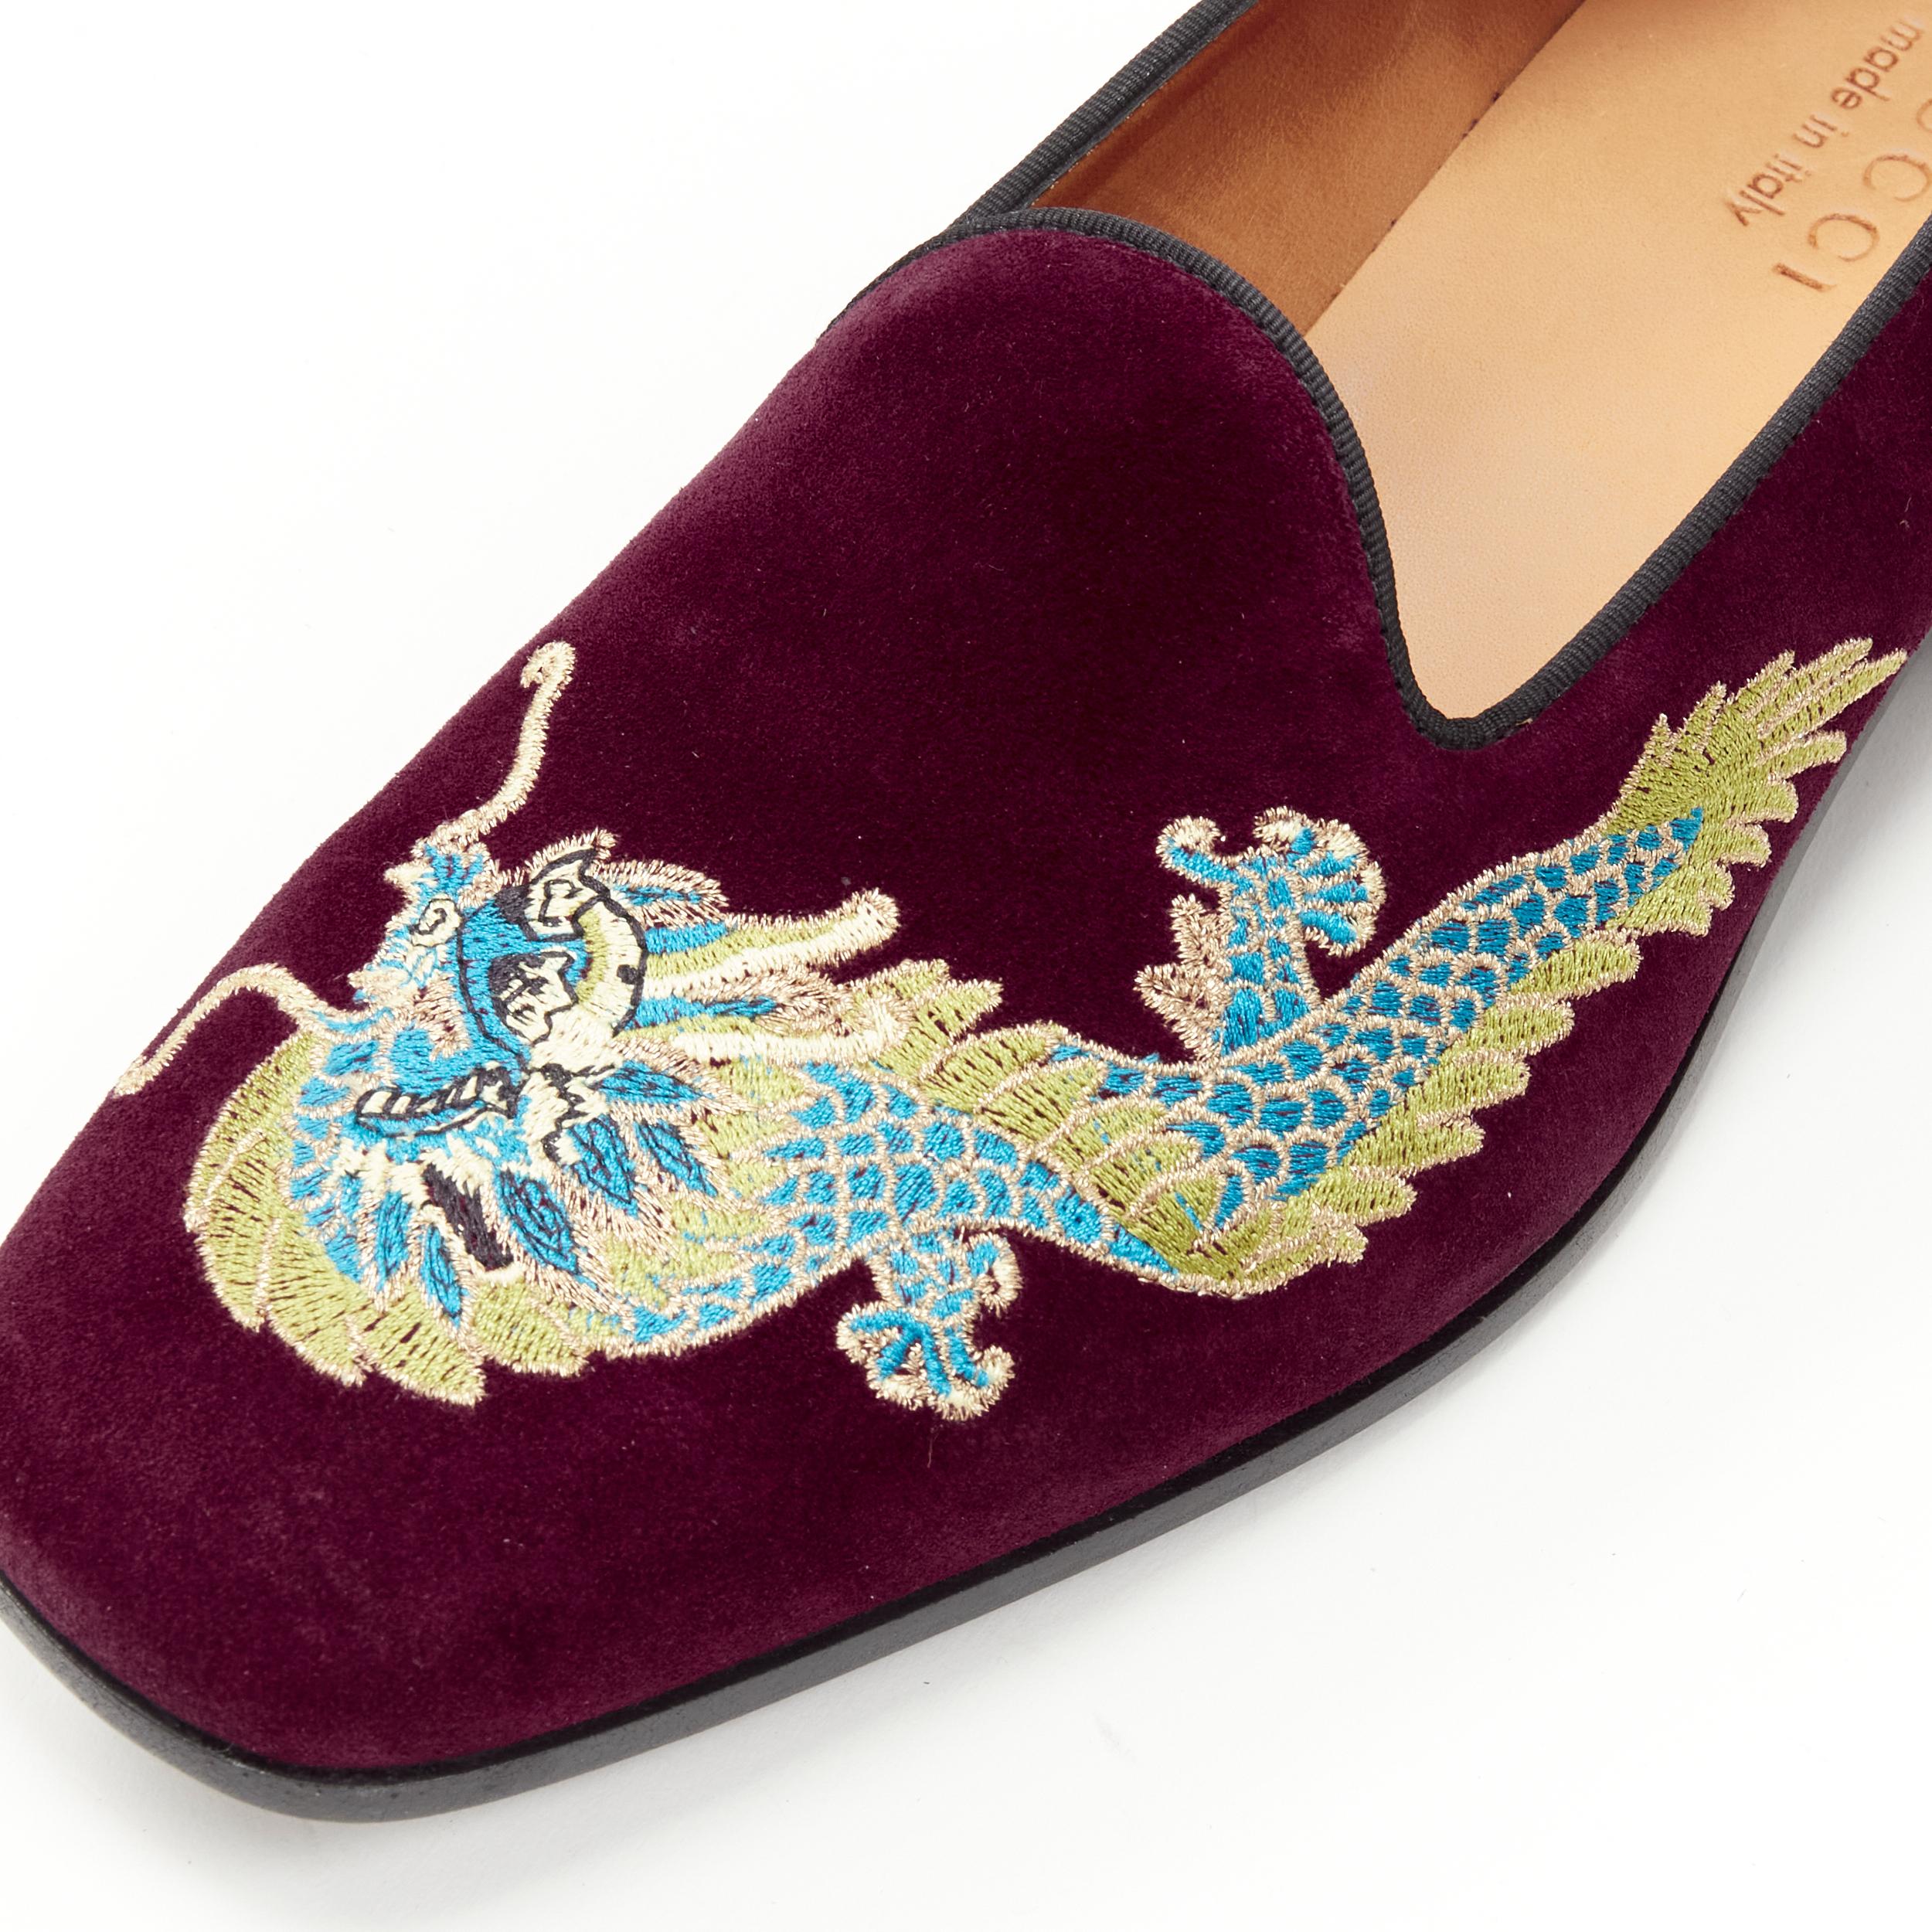 new GUCCI Oriental Dragon embroidered burgundy suede laofer UK7 US8 EU41 For Sale 1